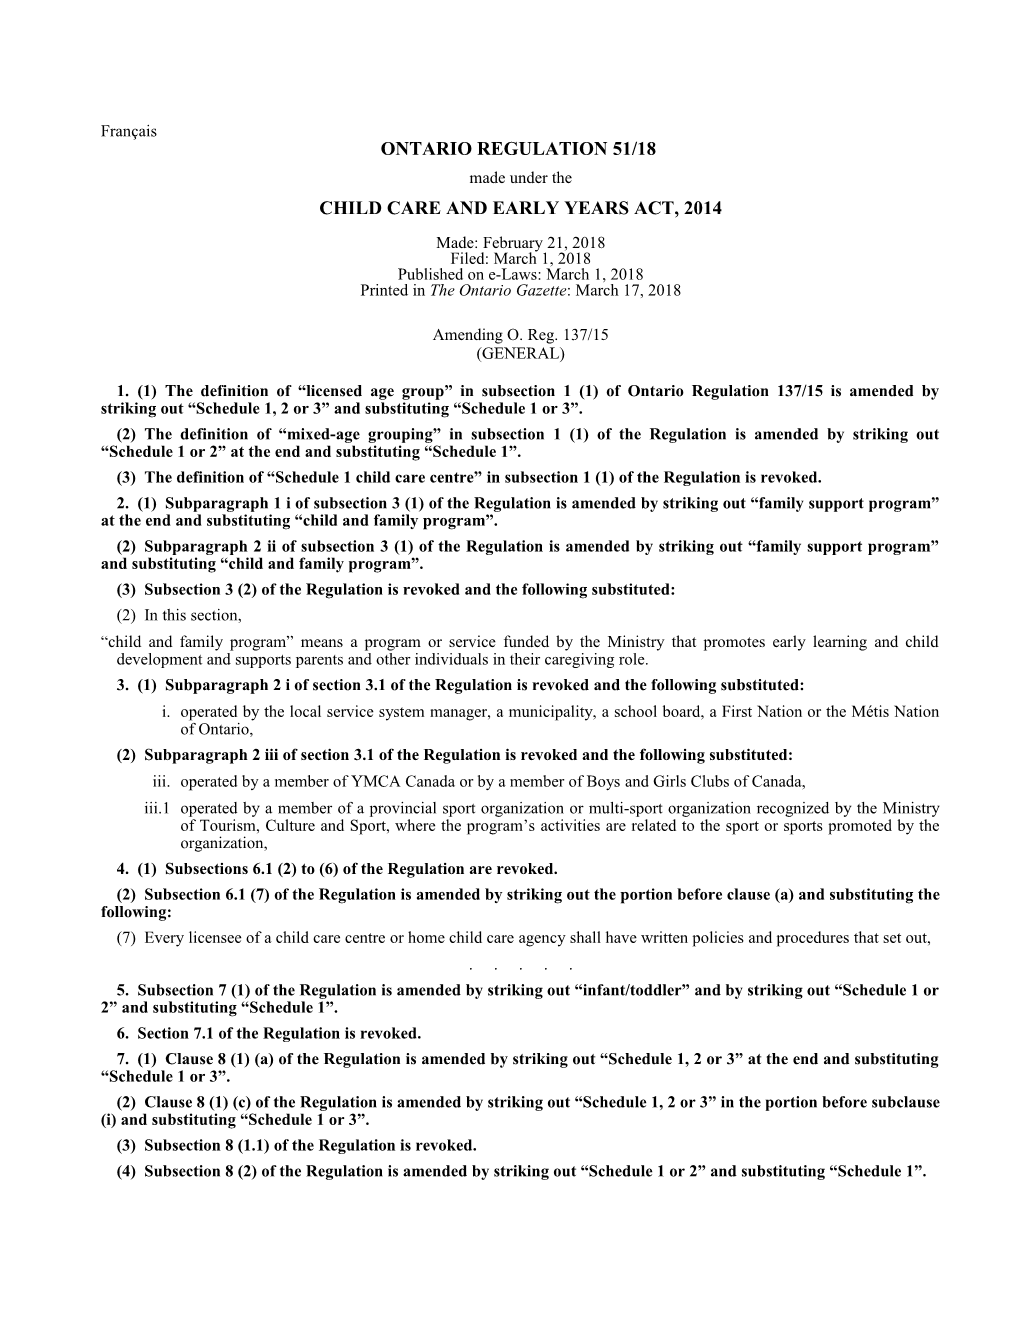 CHILD CARE and EARLY YEARS ACT, 2014 - O. Reg. 51/18